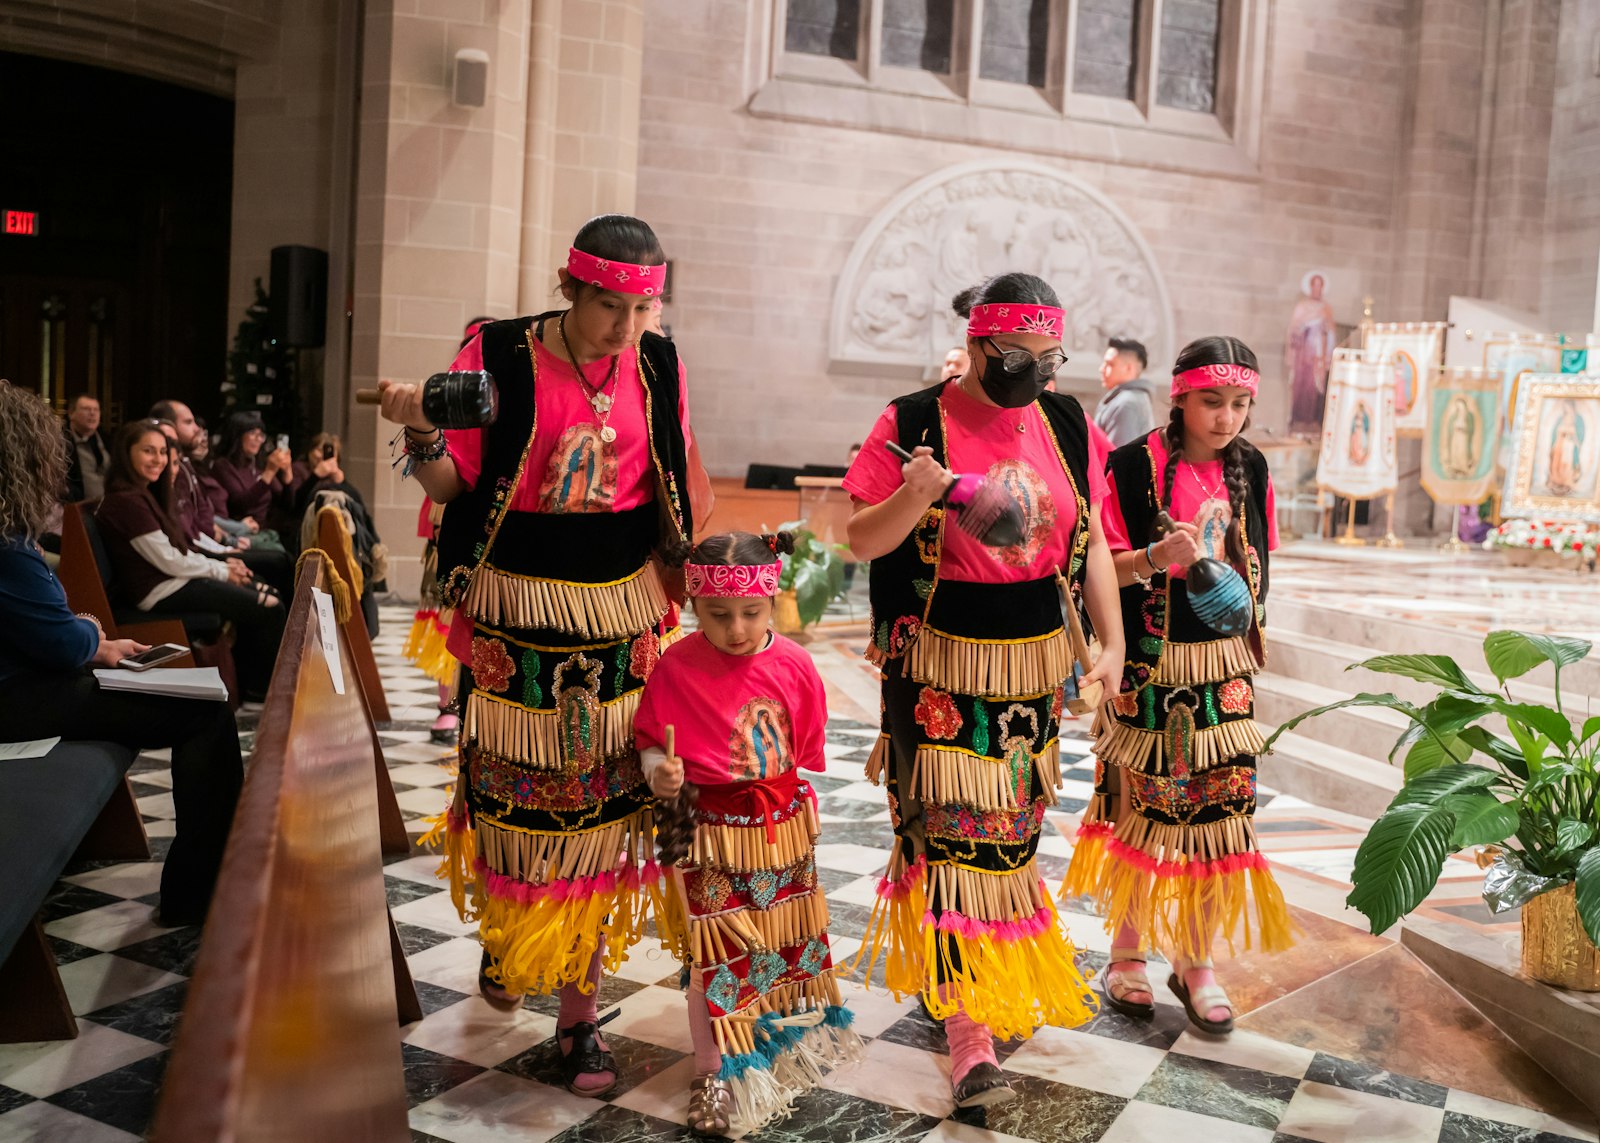 The connection between dance and spirituality echoes the history of the natives' conversion to Catholicism. Thus, dance becomes a cultural bridge that links the indigenous past with the Catholic faith.